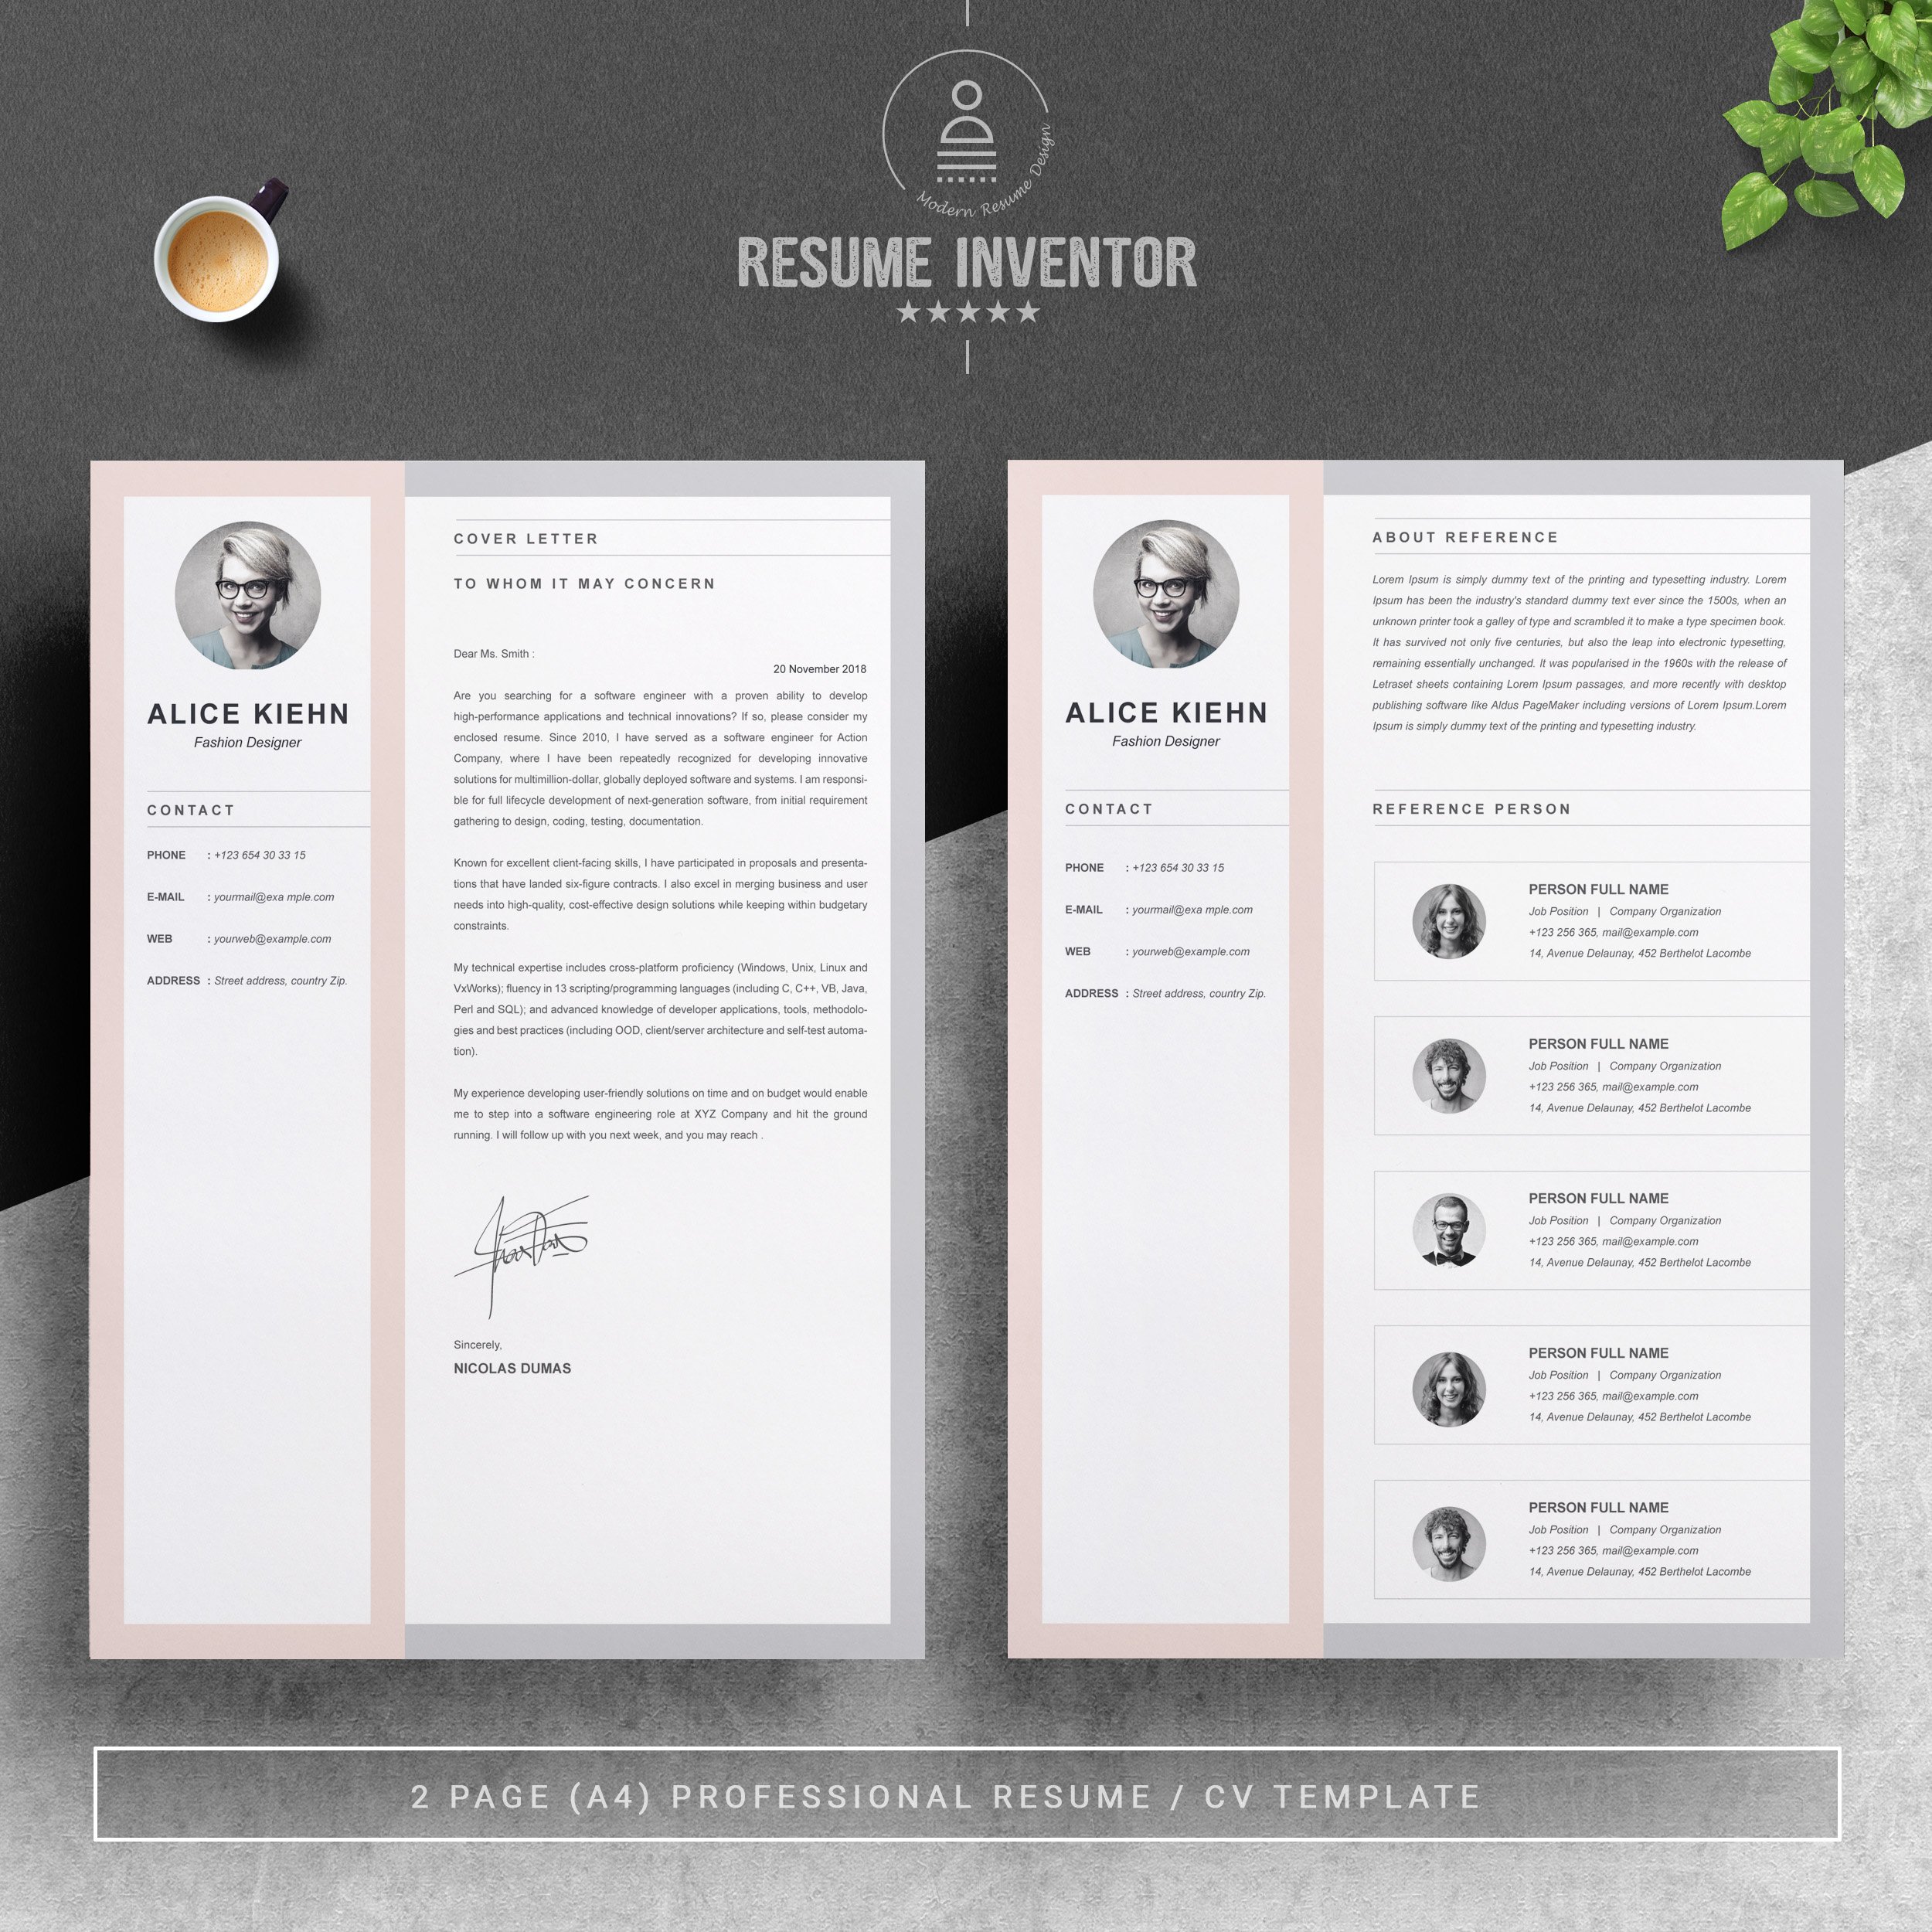 03 2 pages free resume design template 191